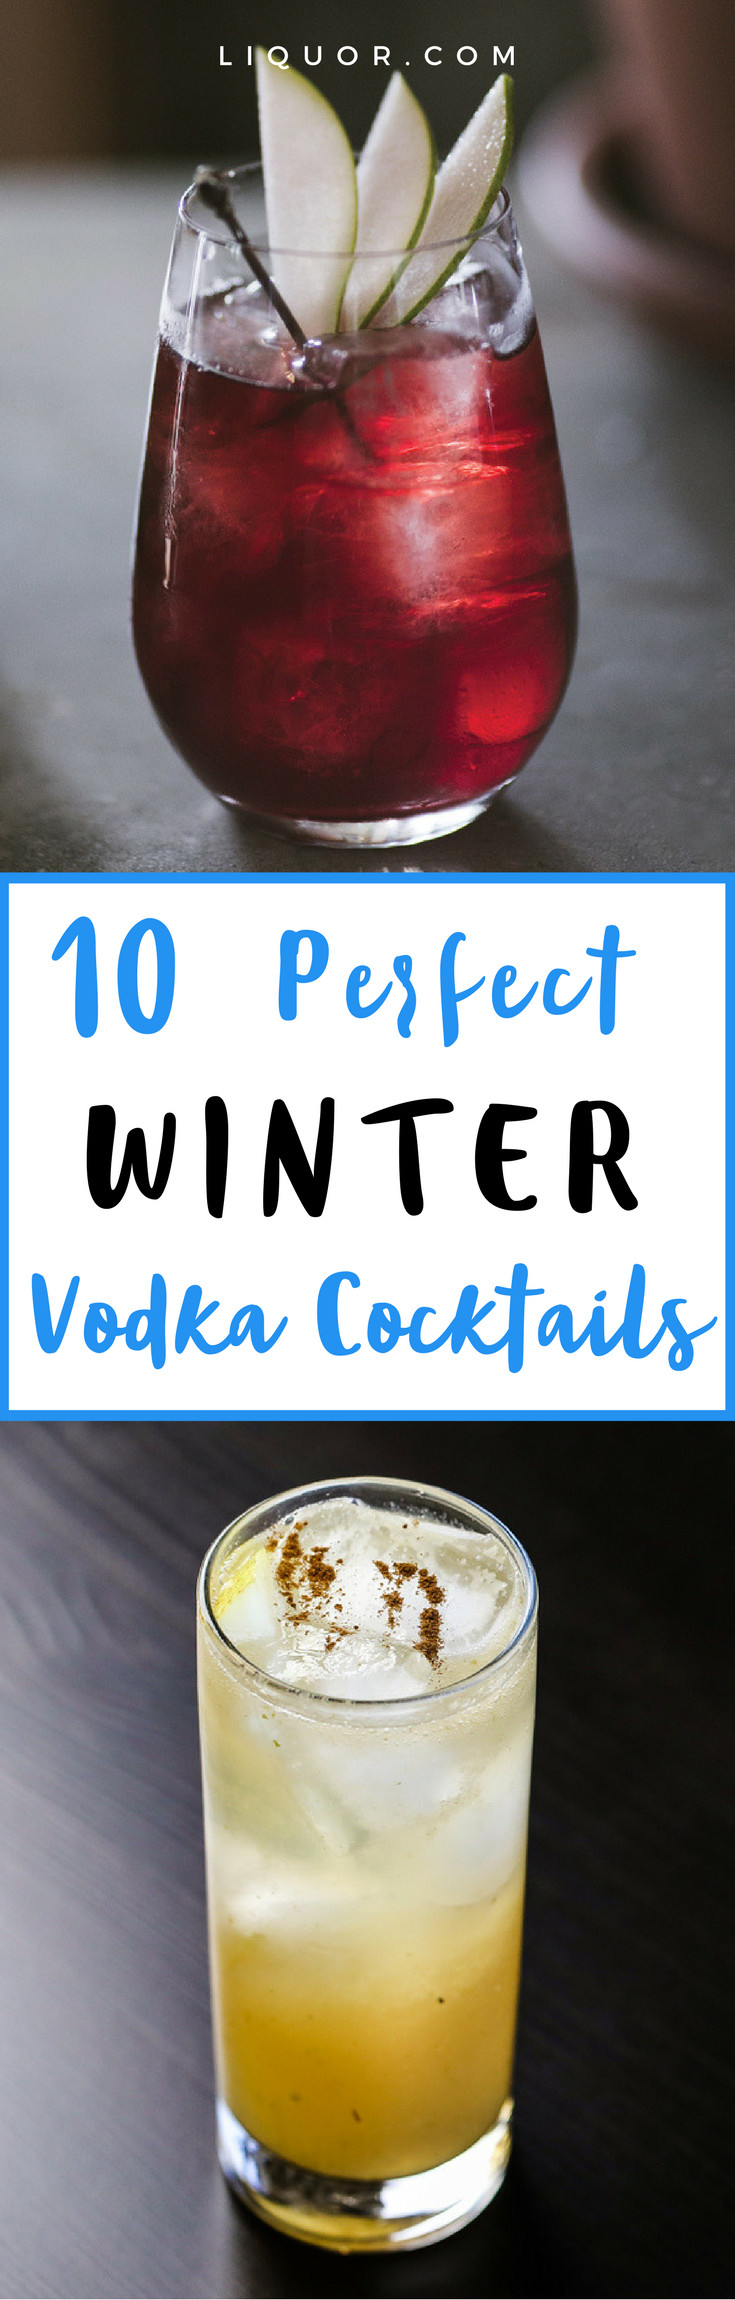 Winter Vodka Drinks
 10 Winter Vodka Cocktails That Are Perfect for the Cold